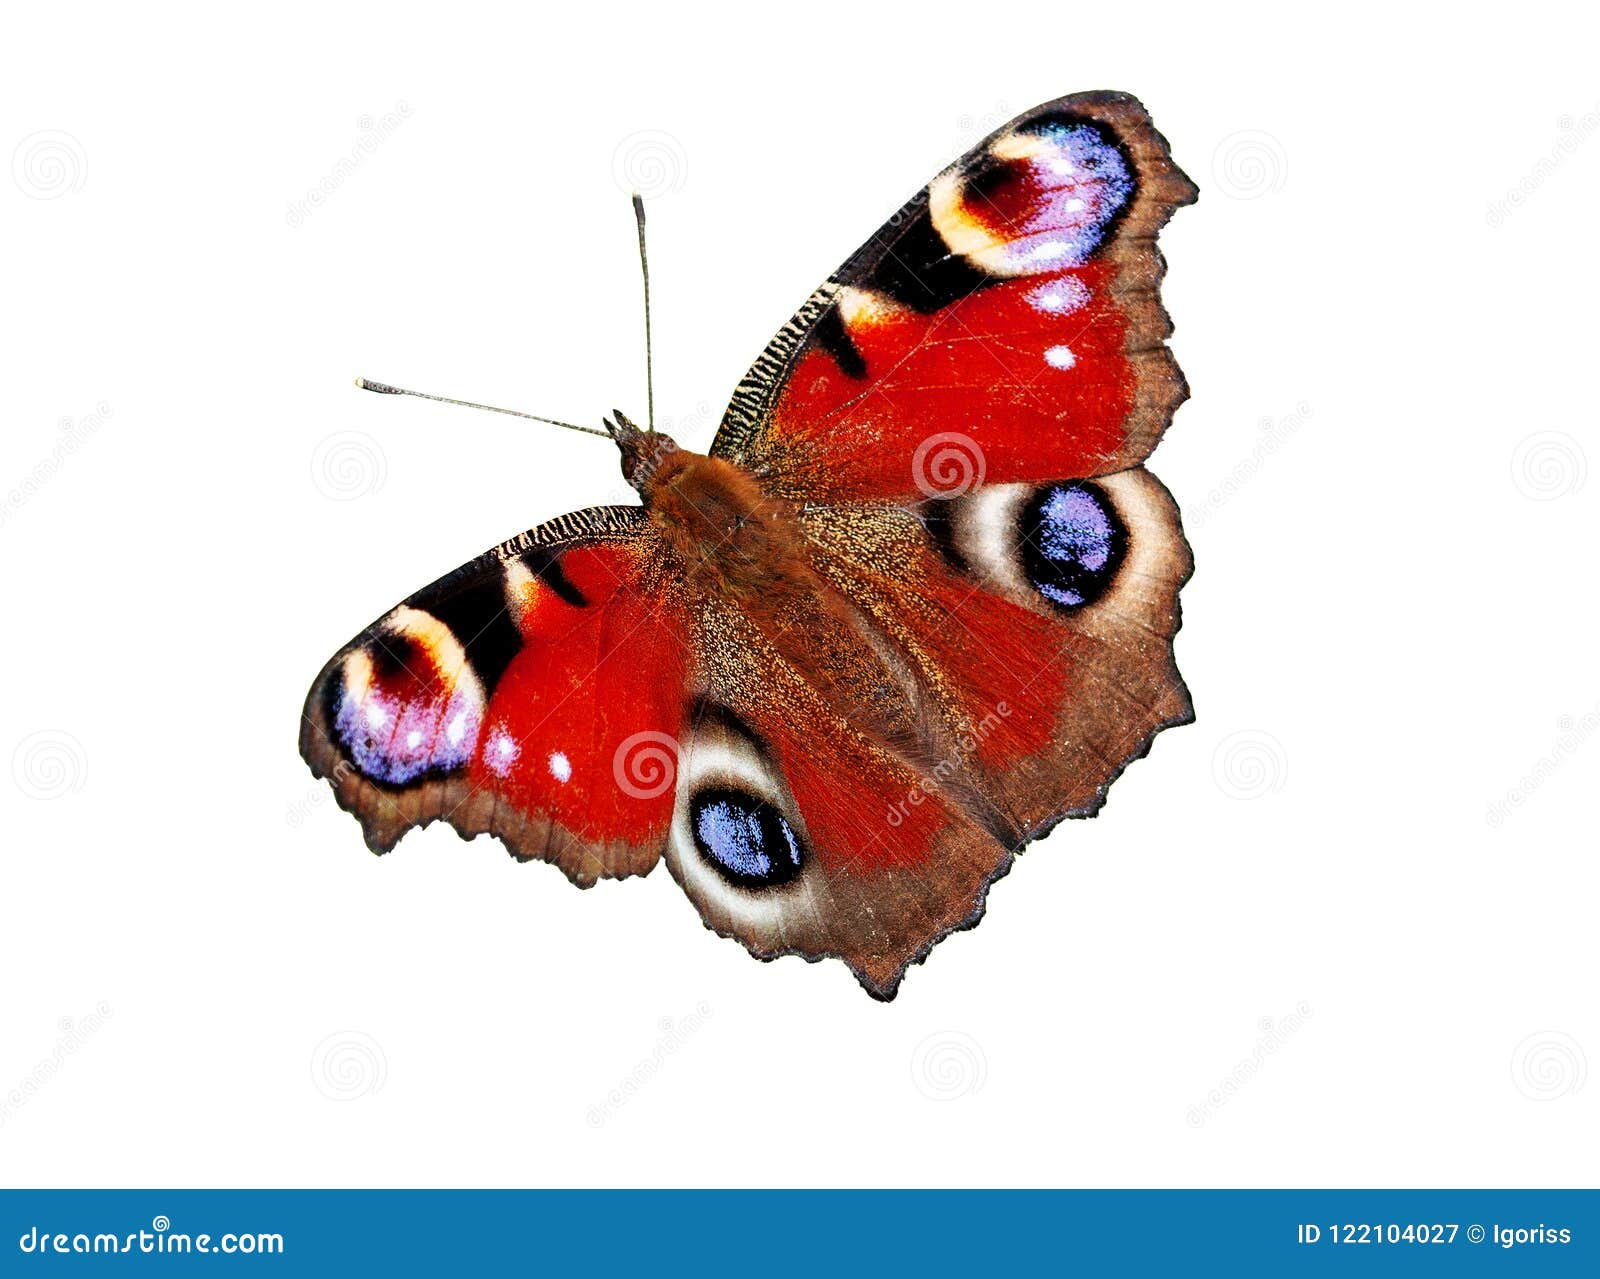 Butterfly Peacock Isolated on White Stock Image - Image of element ...